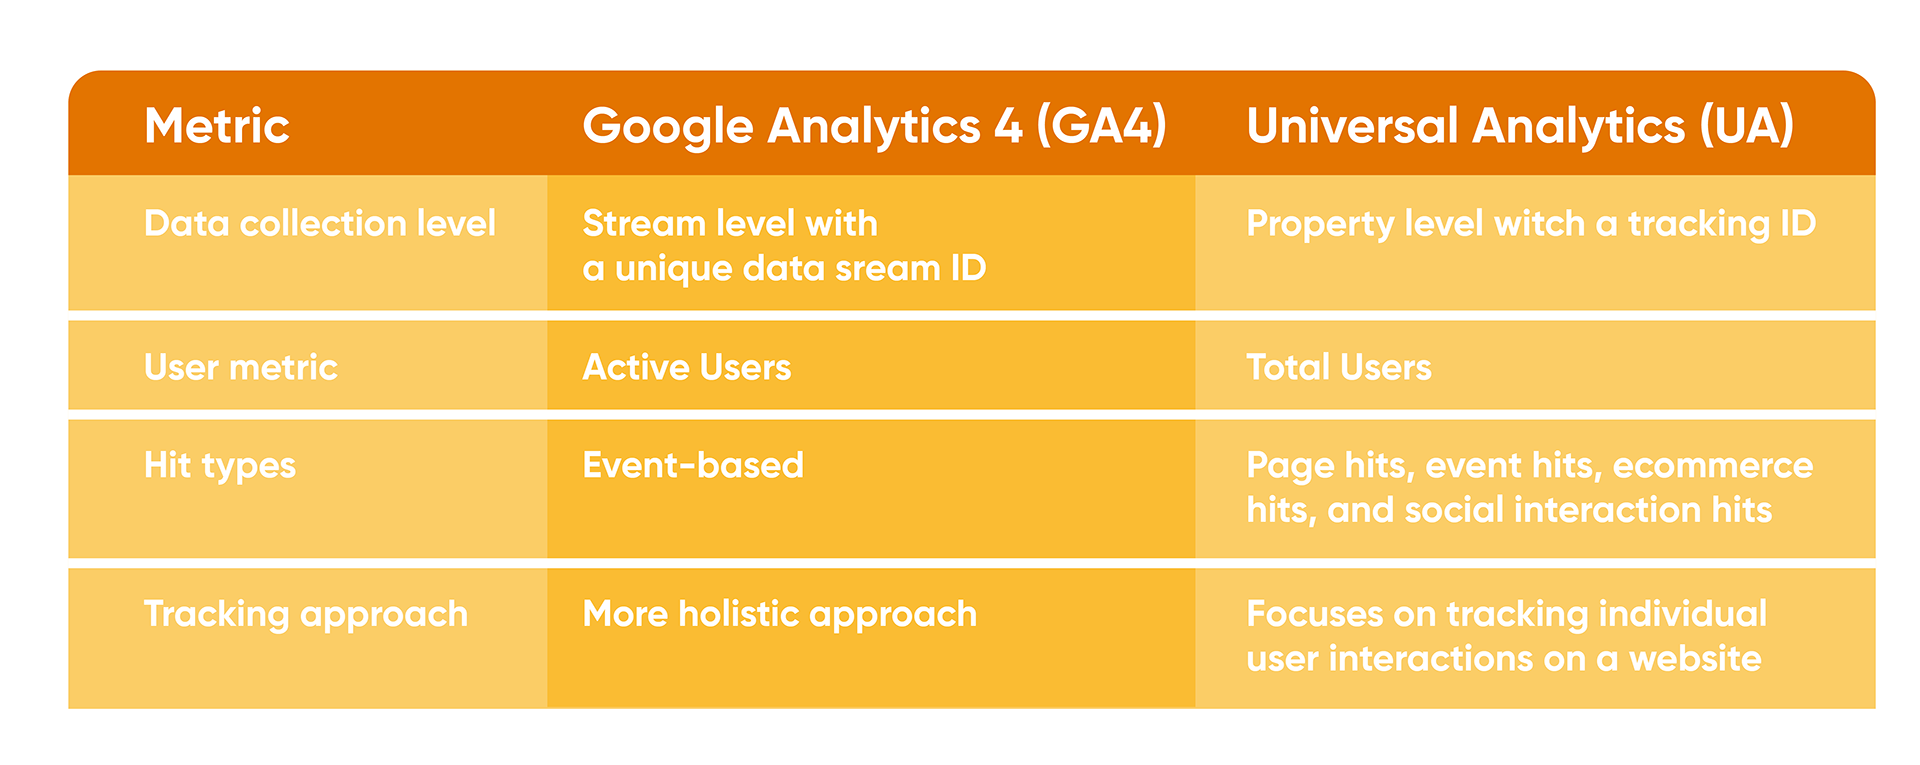 key differences between UA and GA4